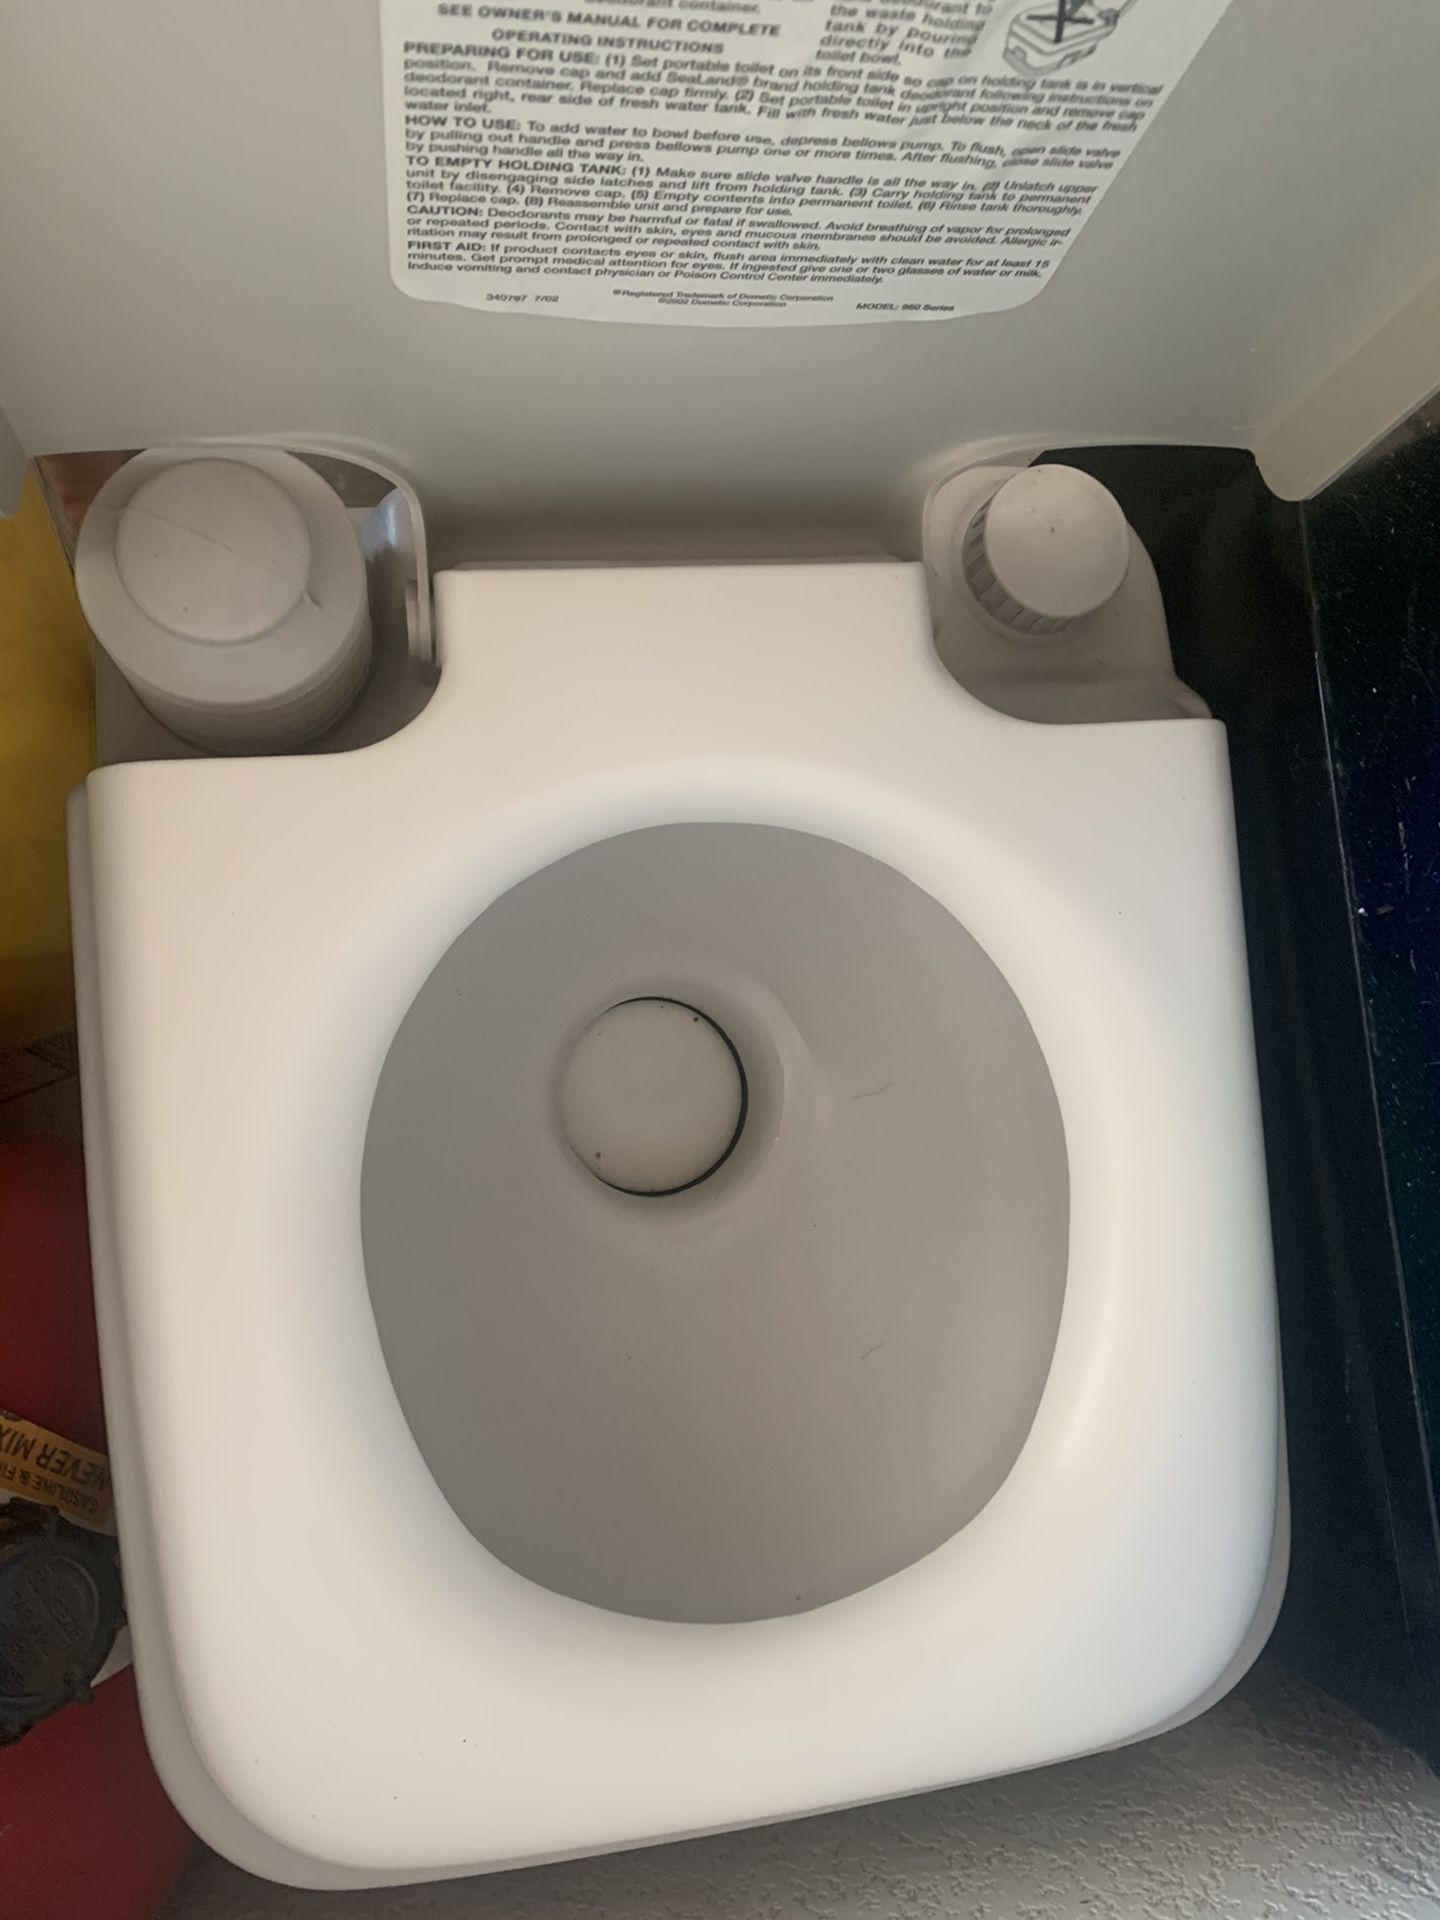 Portable toilet for boat camping or rv